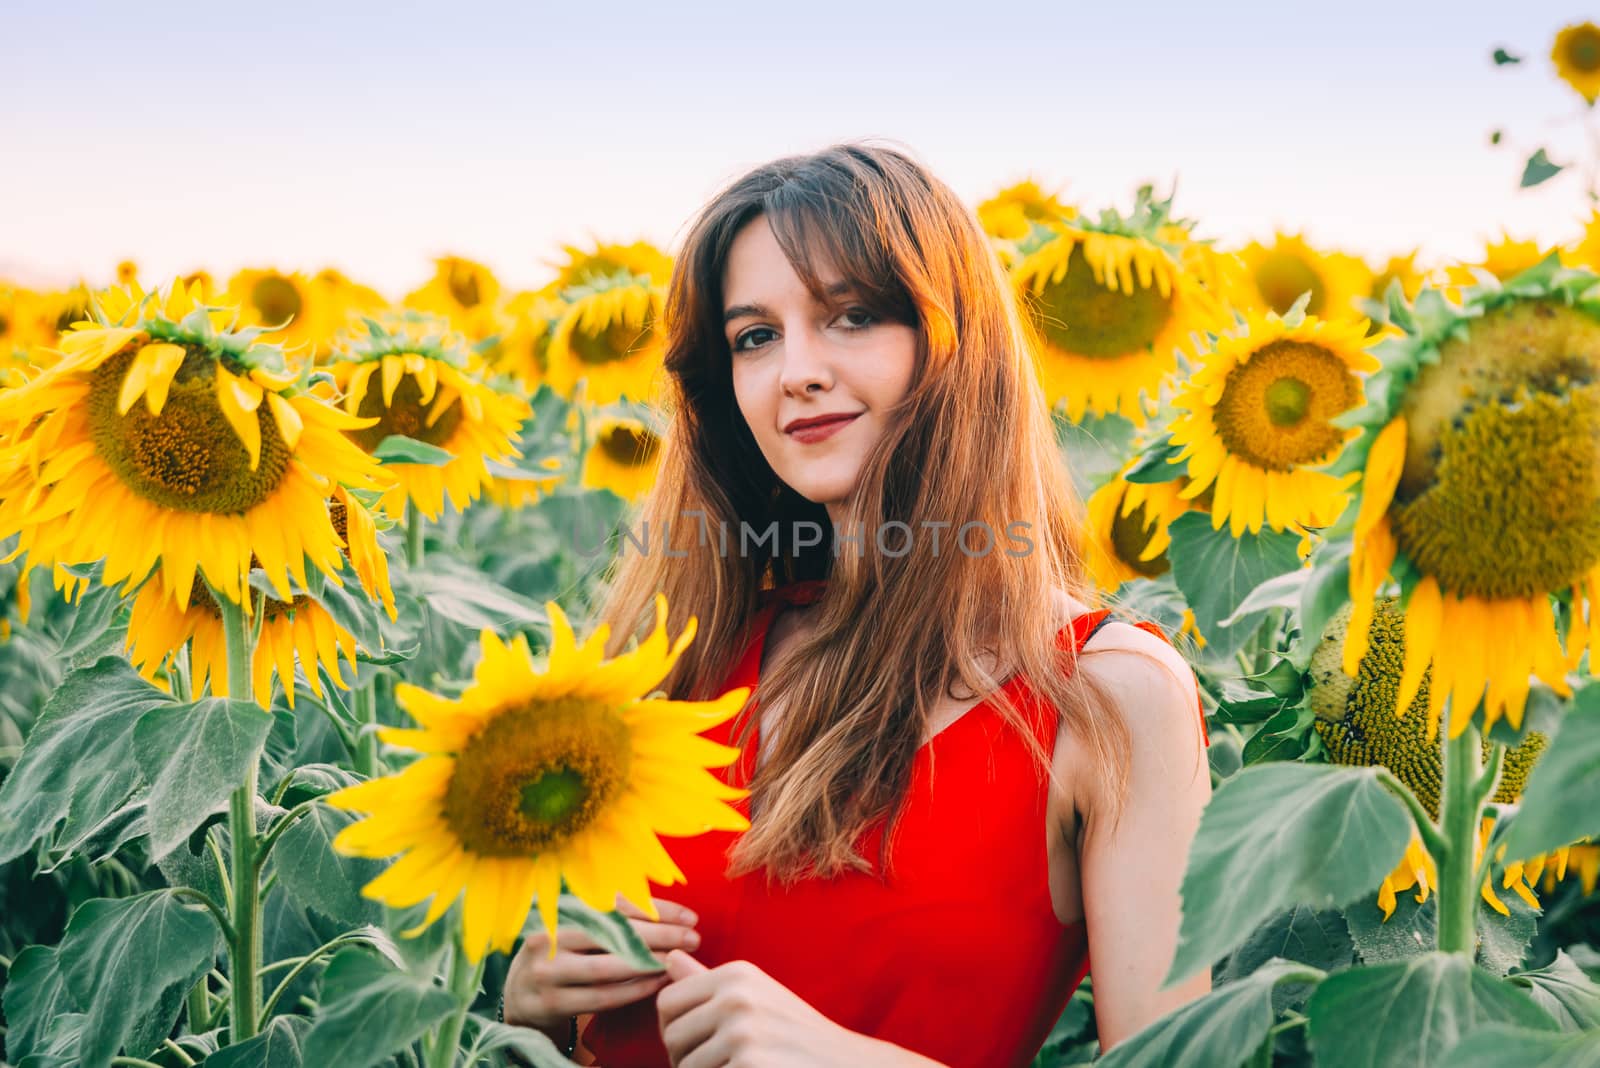 woman with red dress in sunflowers field. by Fotoeventis